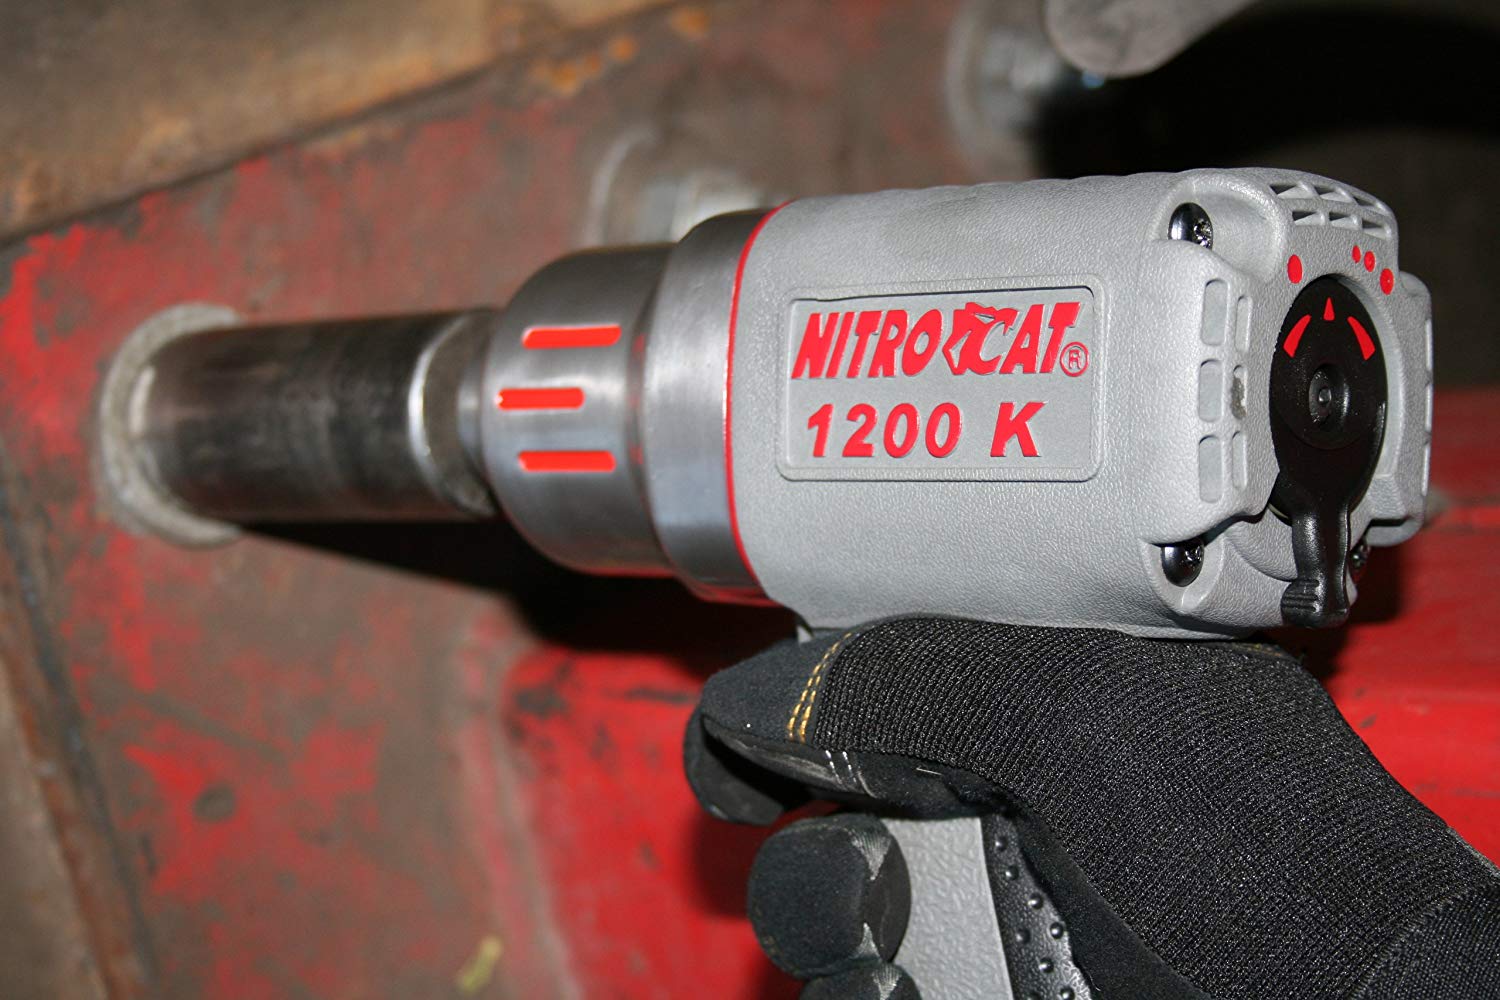 NITROCAT 1200-K 1/2-Inch Kevlar Composite Air Impact Wrench with Twin Clutch Mechanism - MPR Tools & Equipment